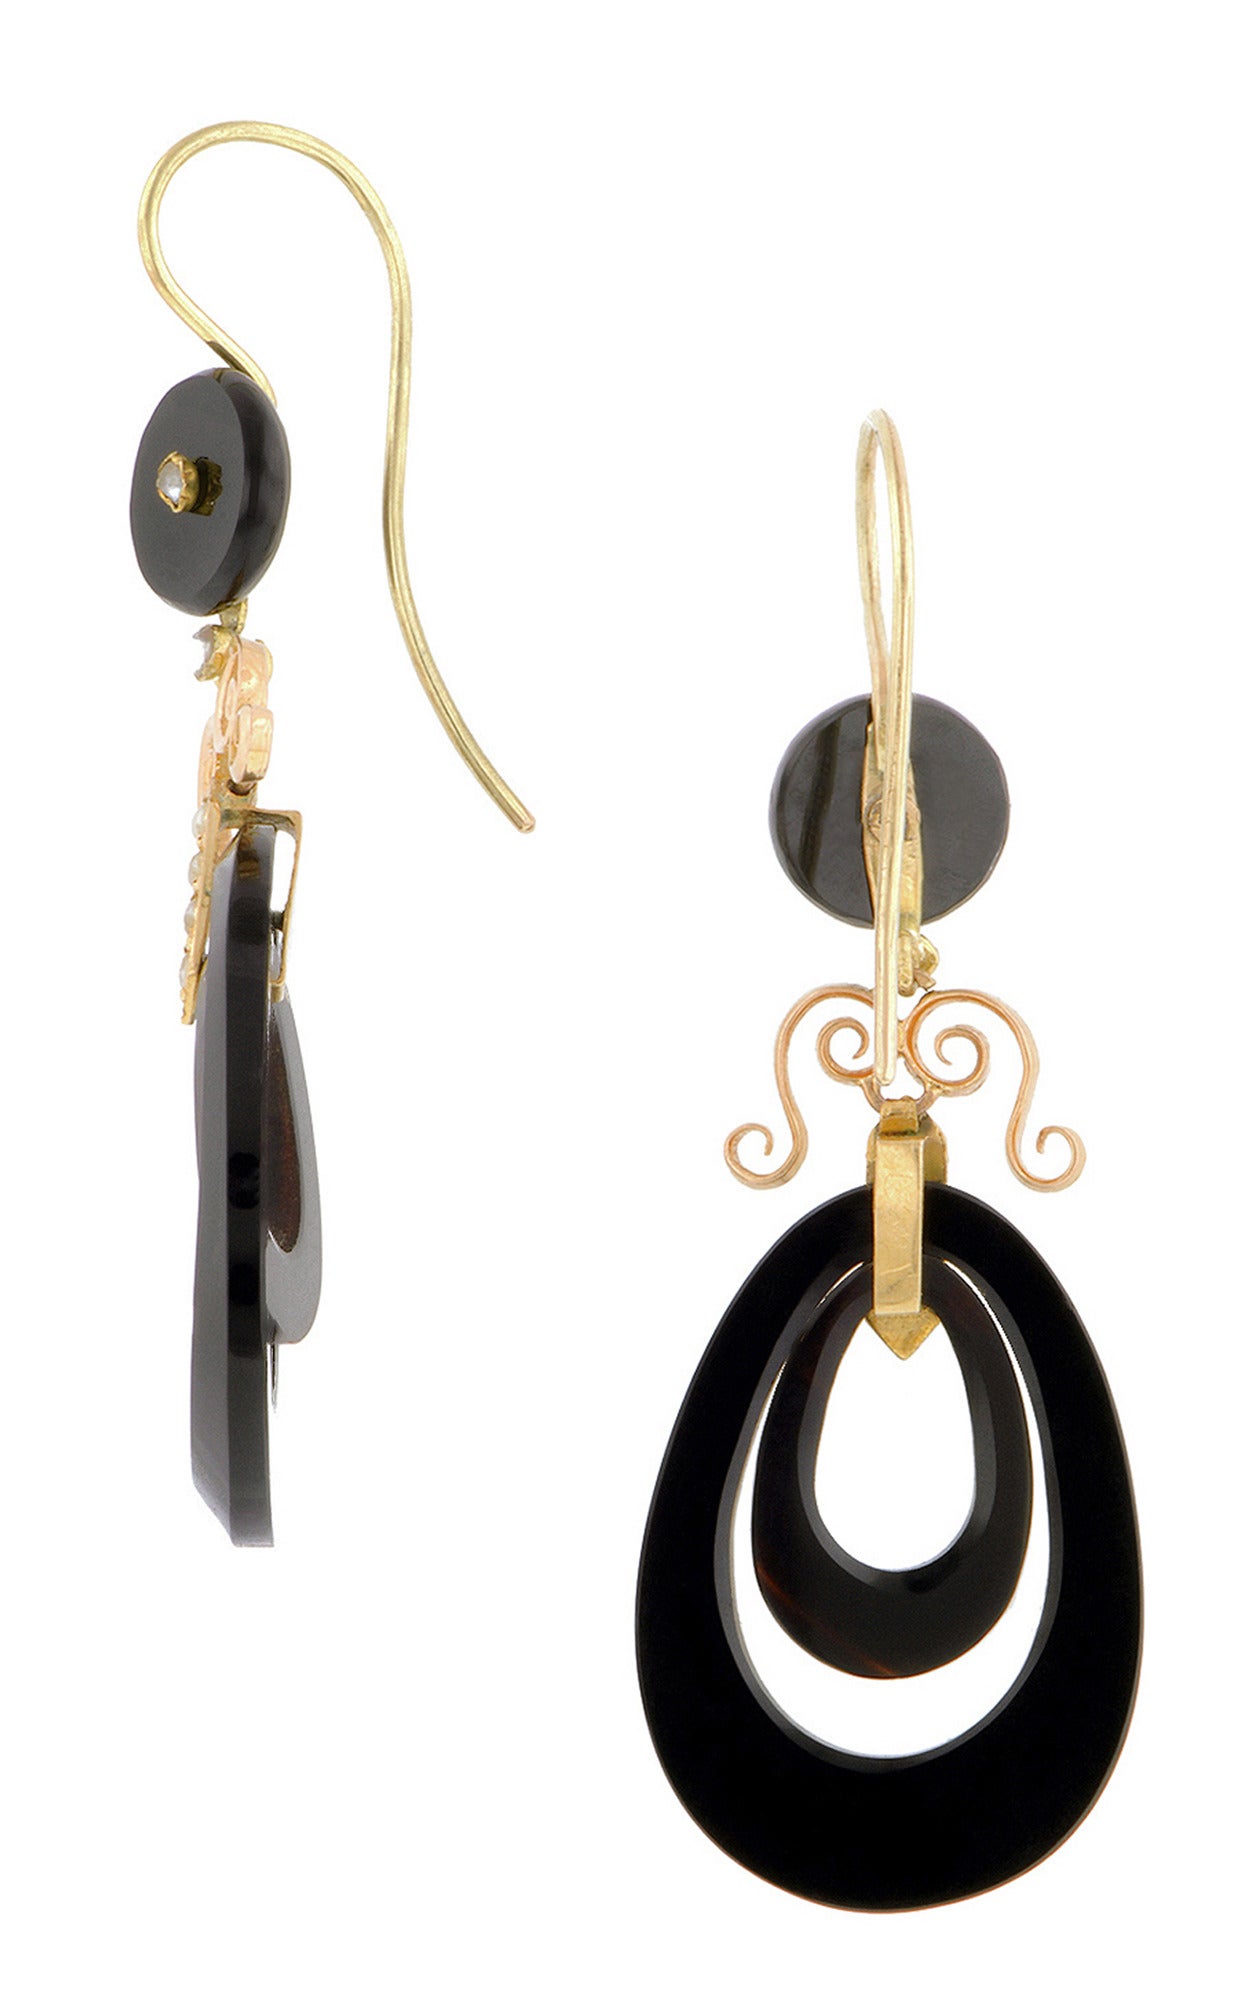 Victorian onyx drop earrings featuring concentric, pear shaped hoops, with scroll and seed pearl (1.0 - 1.5mm) tops, fashioned in 18k. Circa 1880. Length 2 1/8 inches (including ear wire).